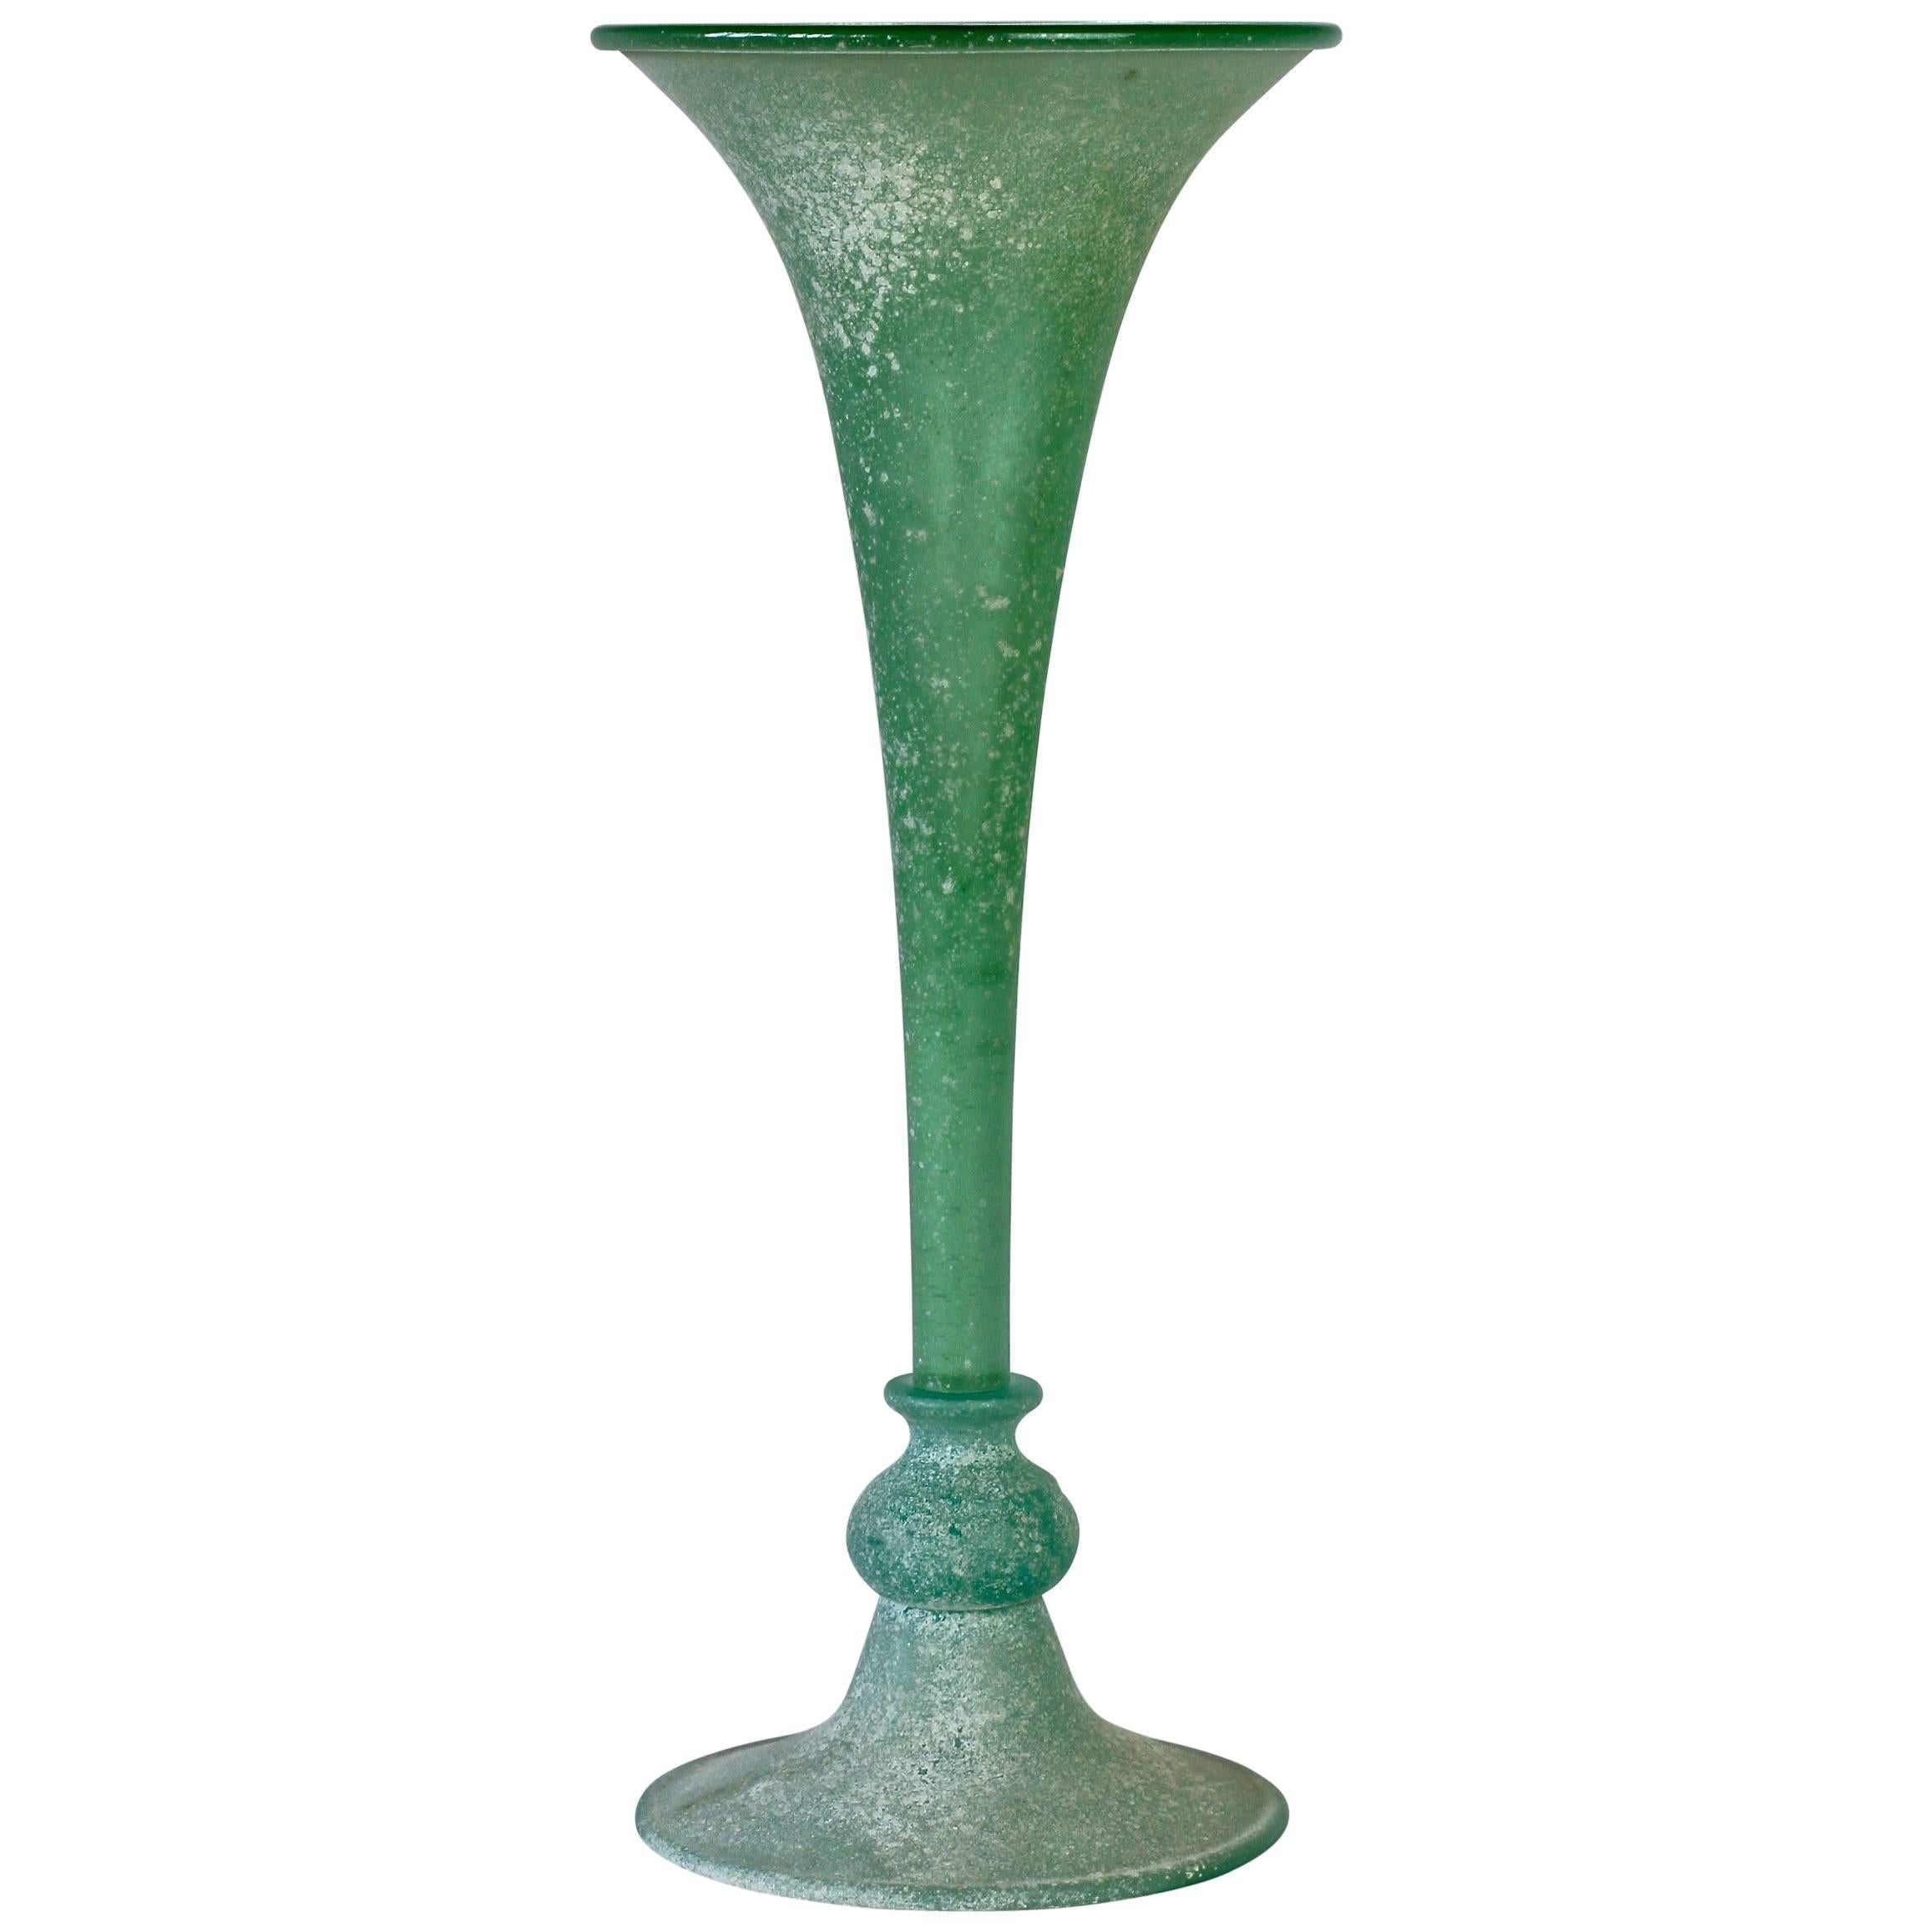 Tall Green 'A Scavo' Murano Glass Fluted Vase Attributed to Seguso Vetri d'Arte